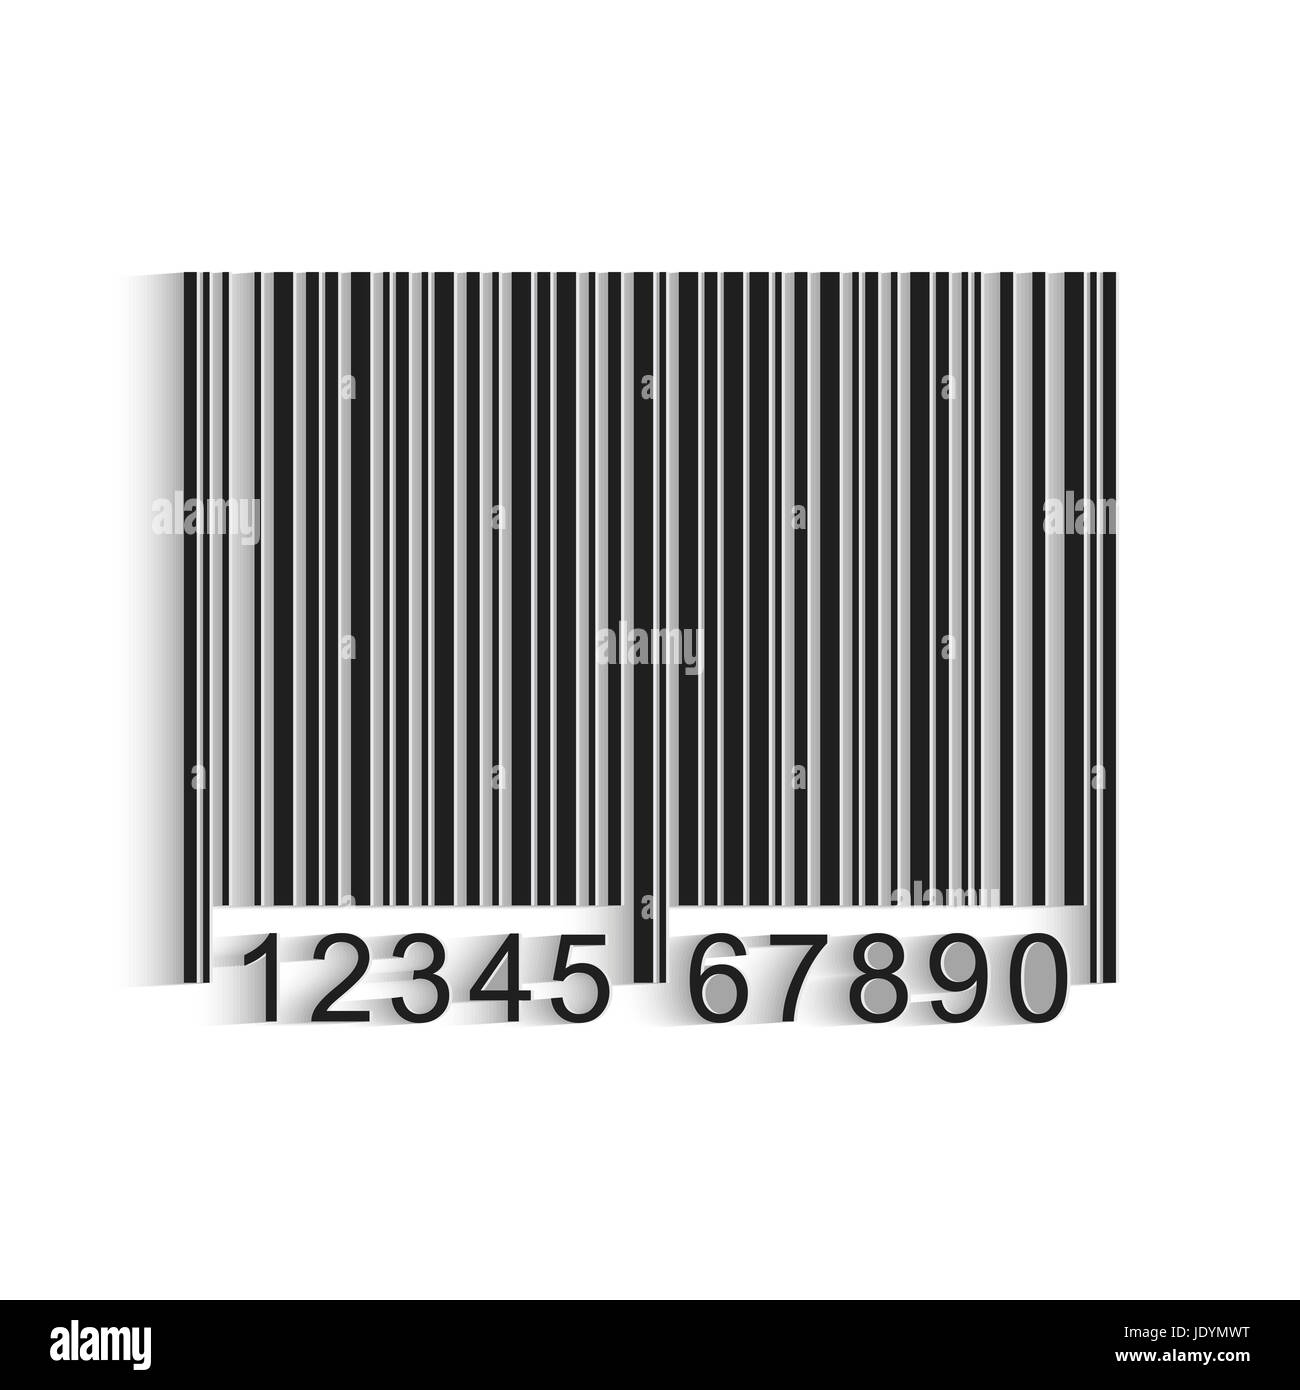 Vector image of a barcode isolated on a white background. Stock Photo